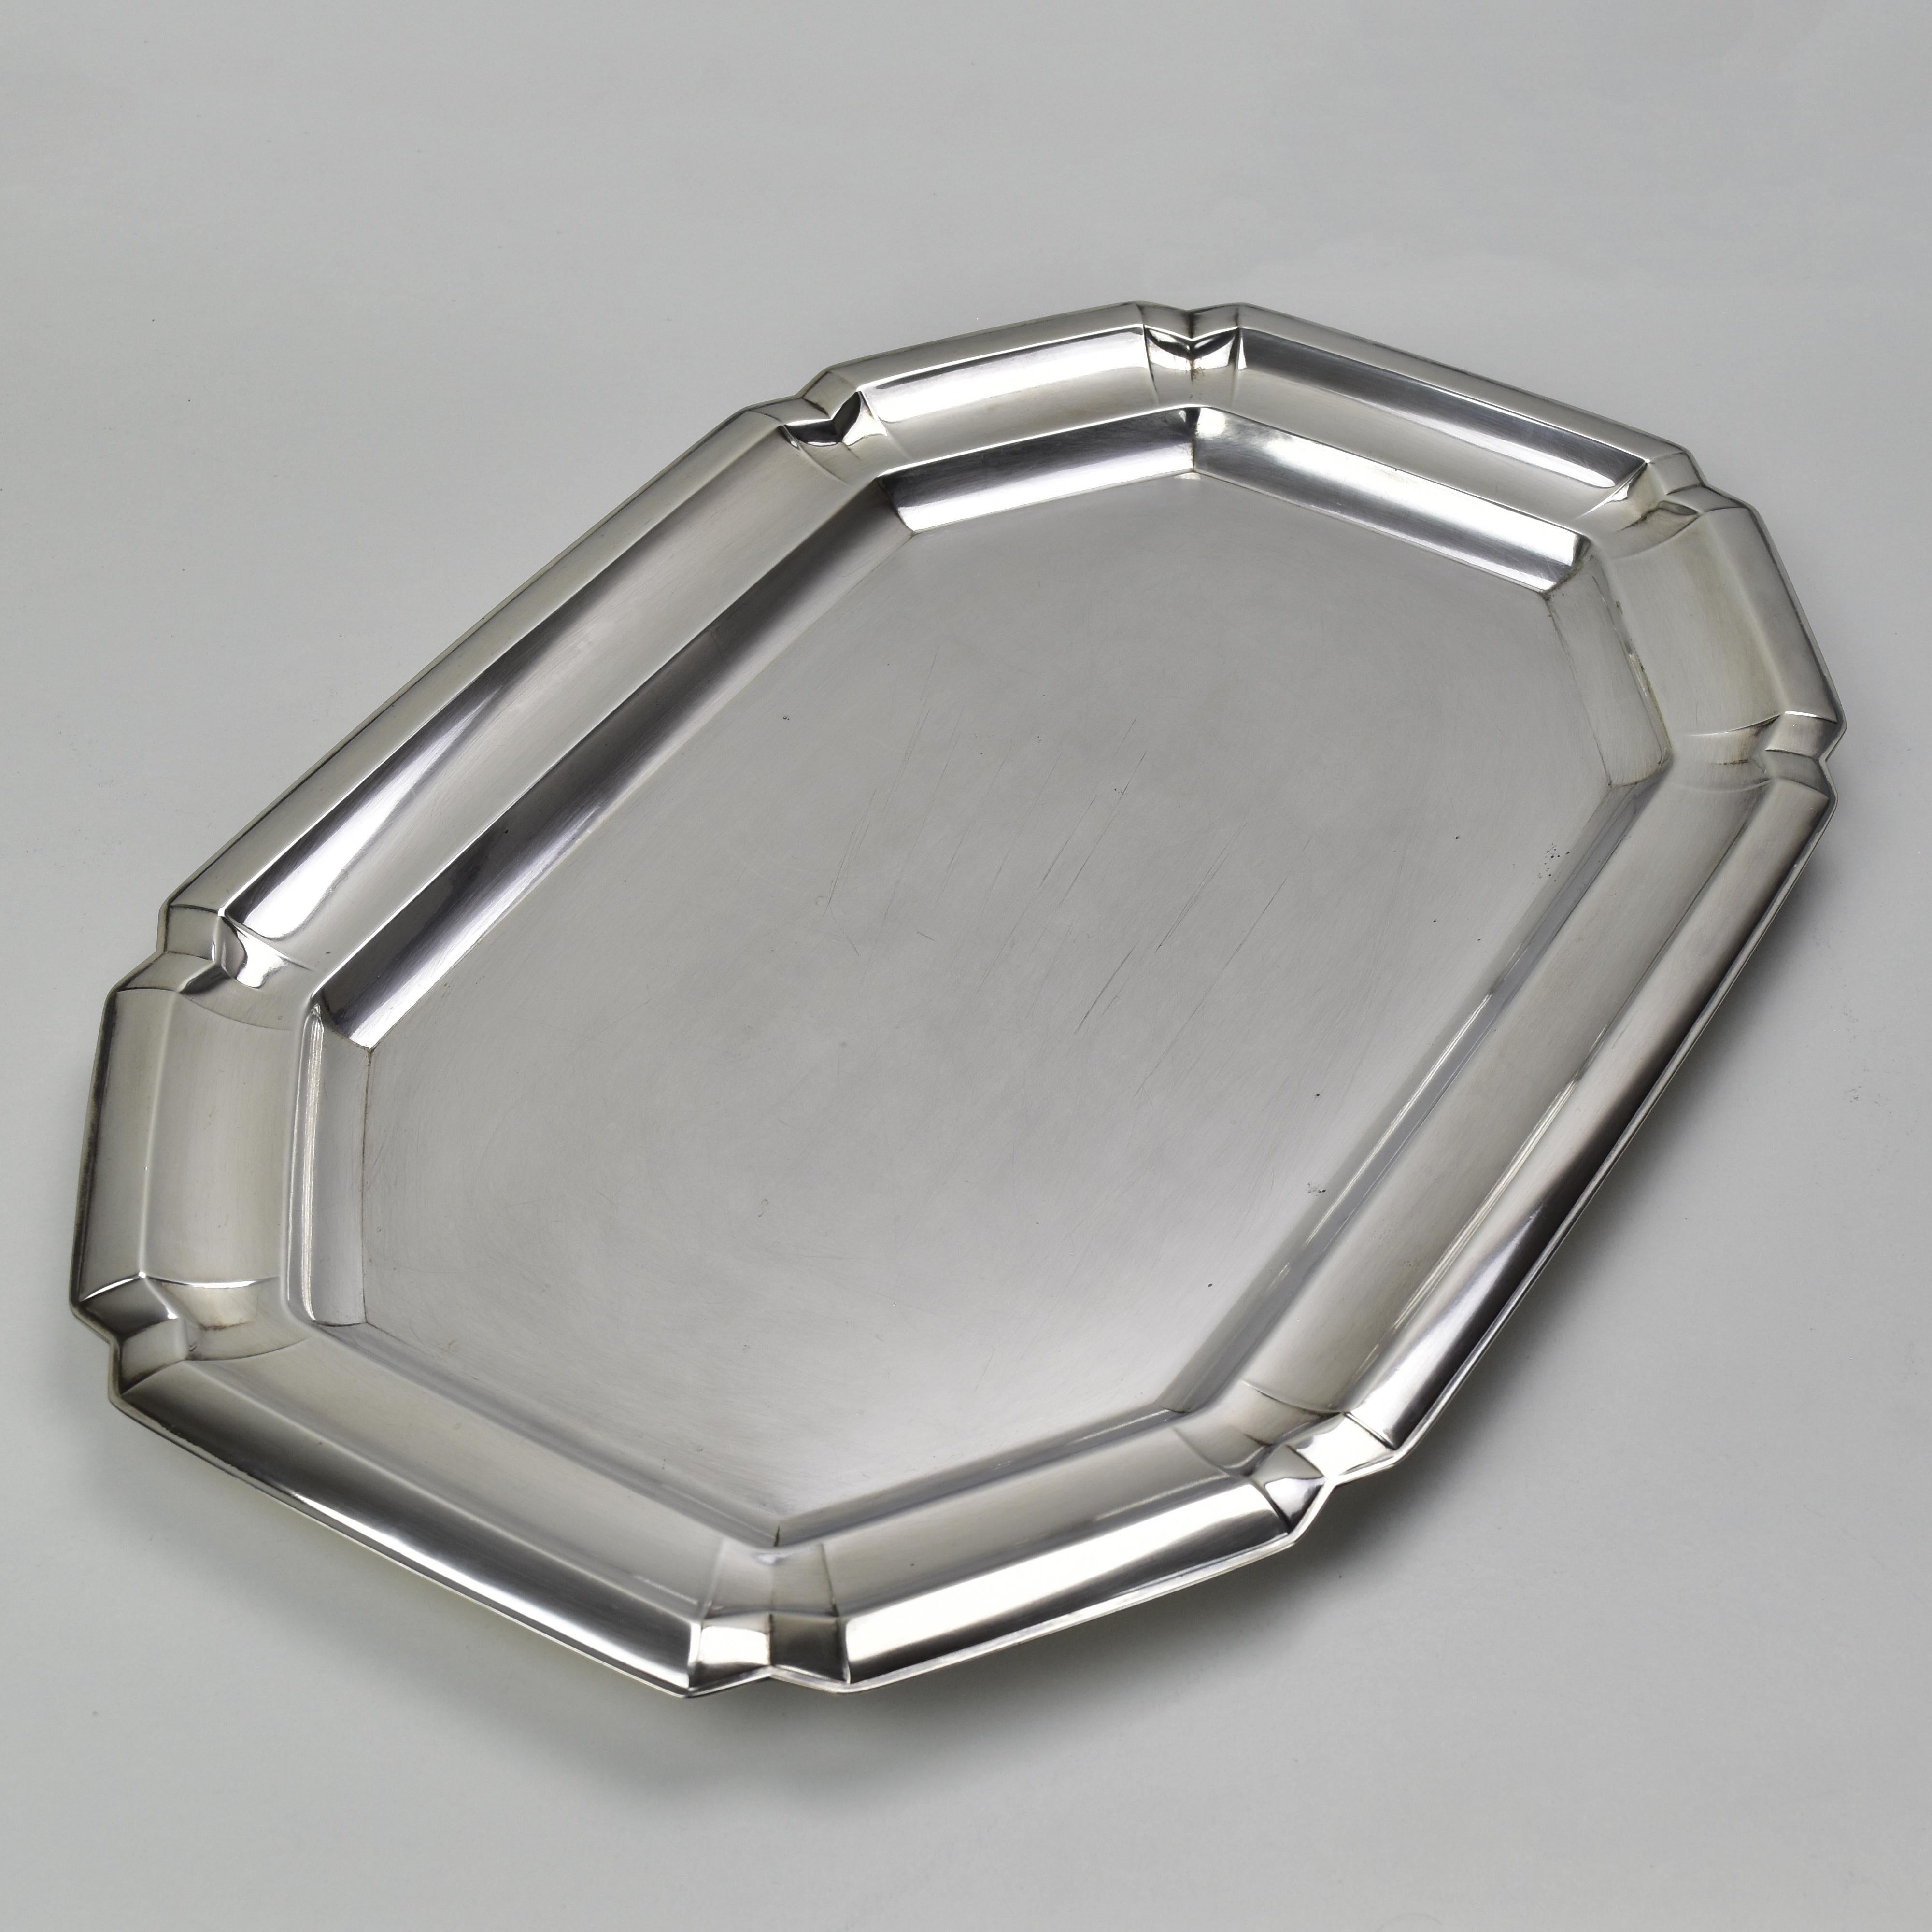 Large Art Deco Cabaret Bar Snack Tray by Quist Silverplate & Cut Crystal Liners For Sale 10